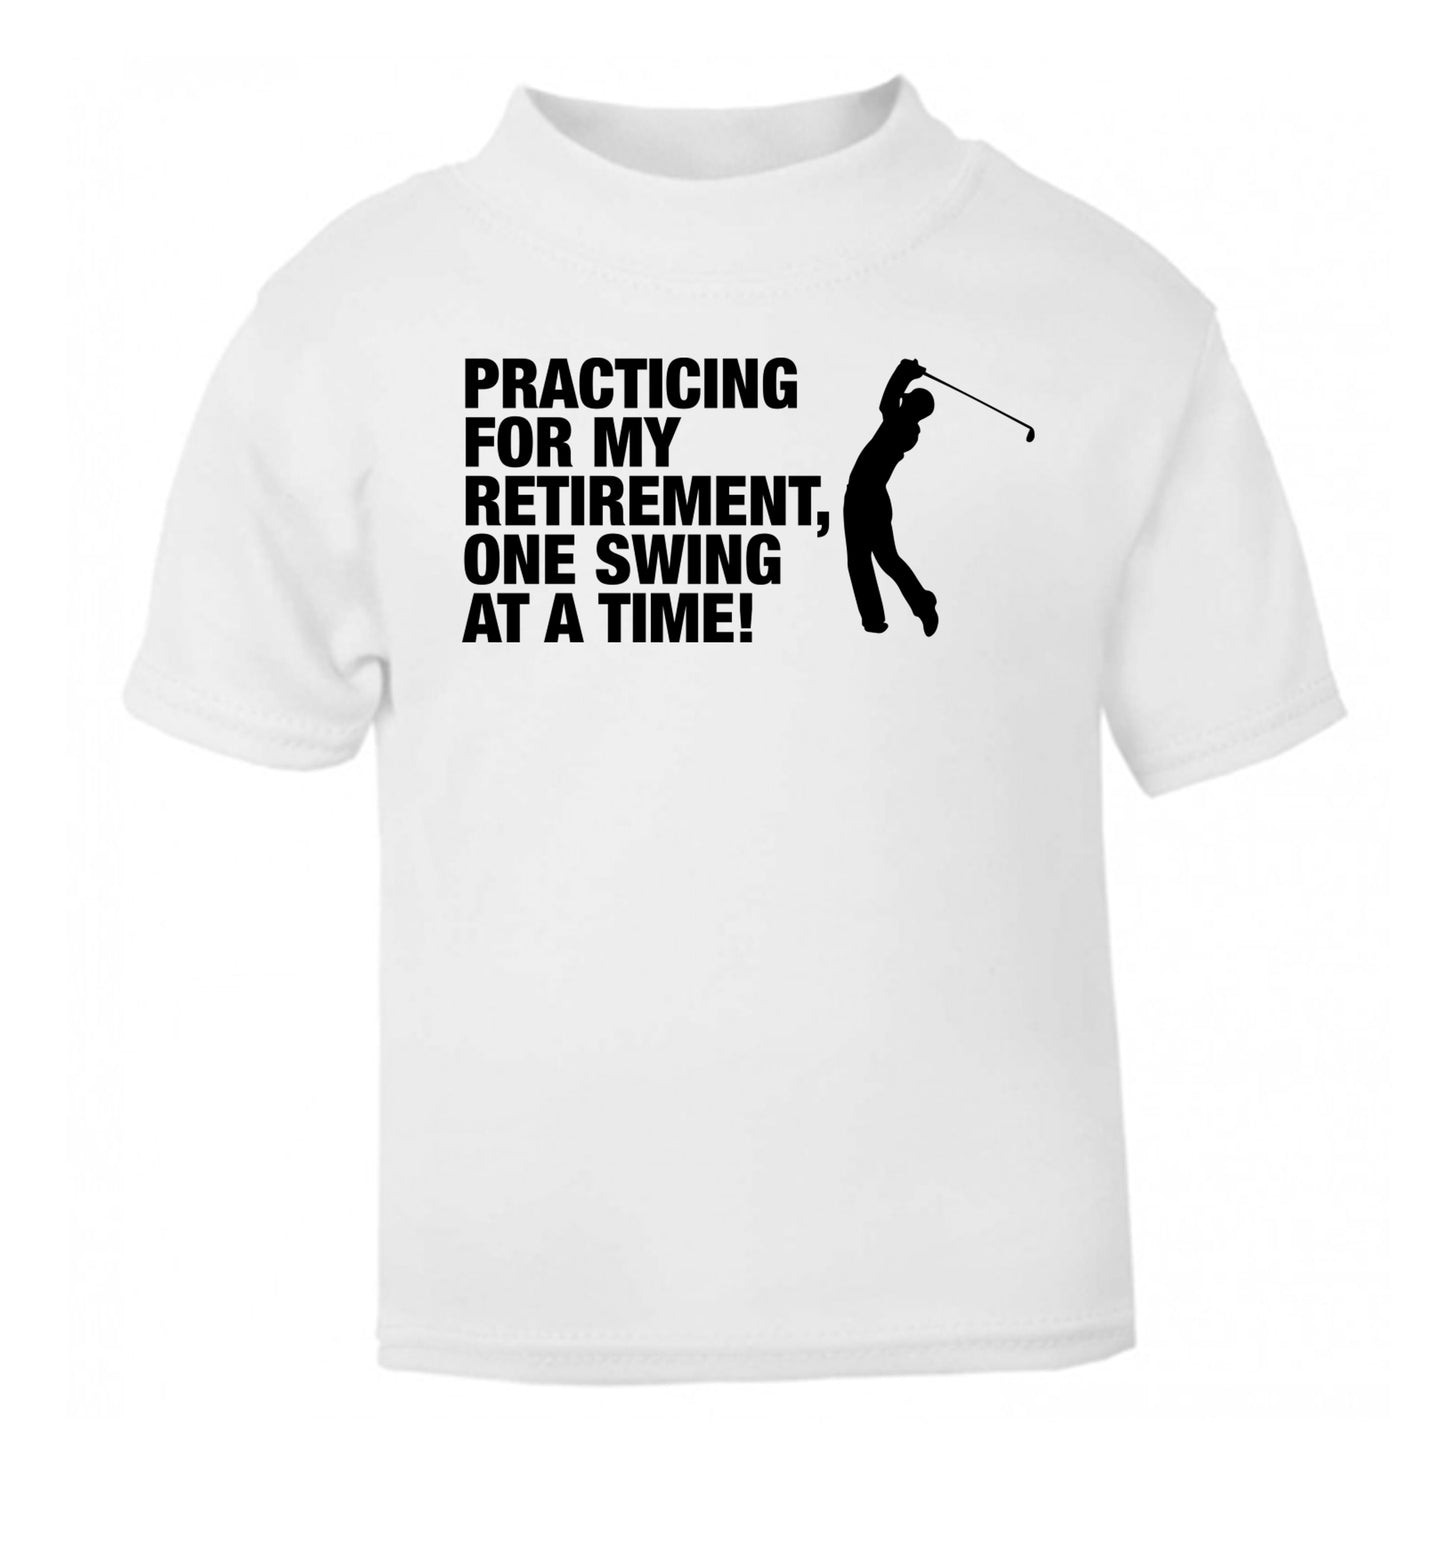 Practicing for my retirement one swing at a time white Baby Toddler Tshirt 2 Years